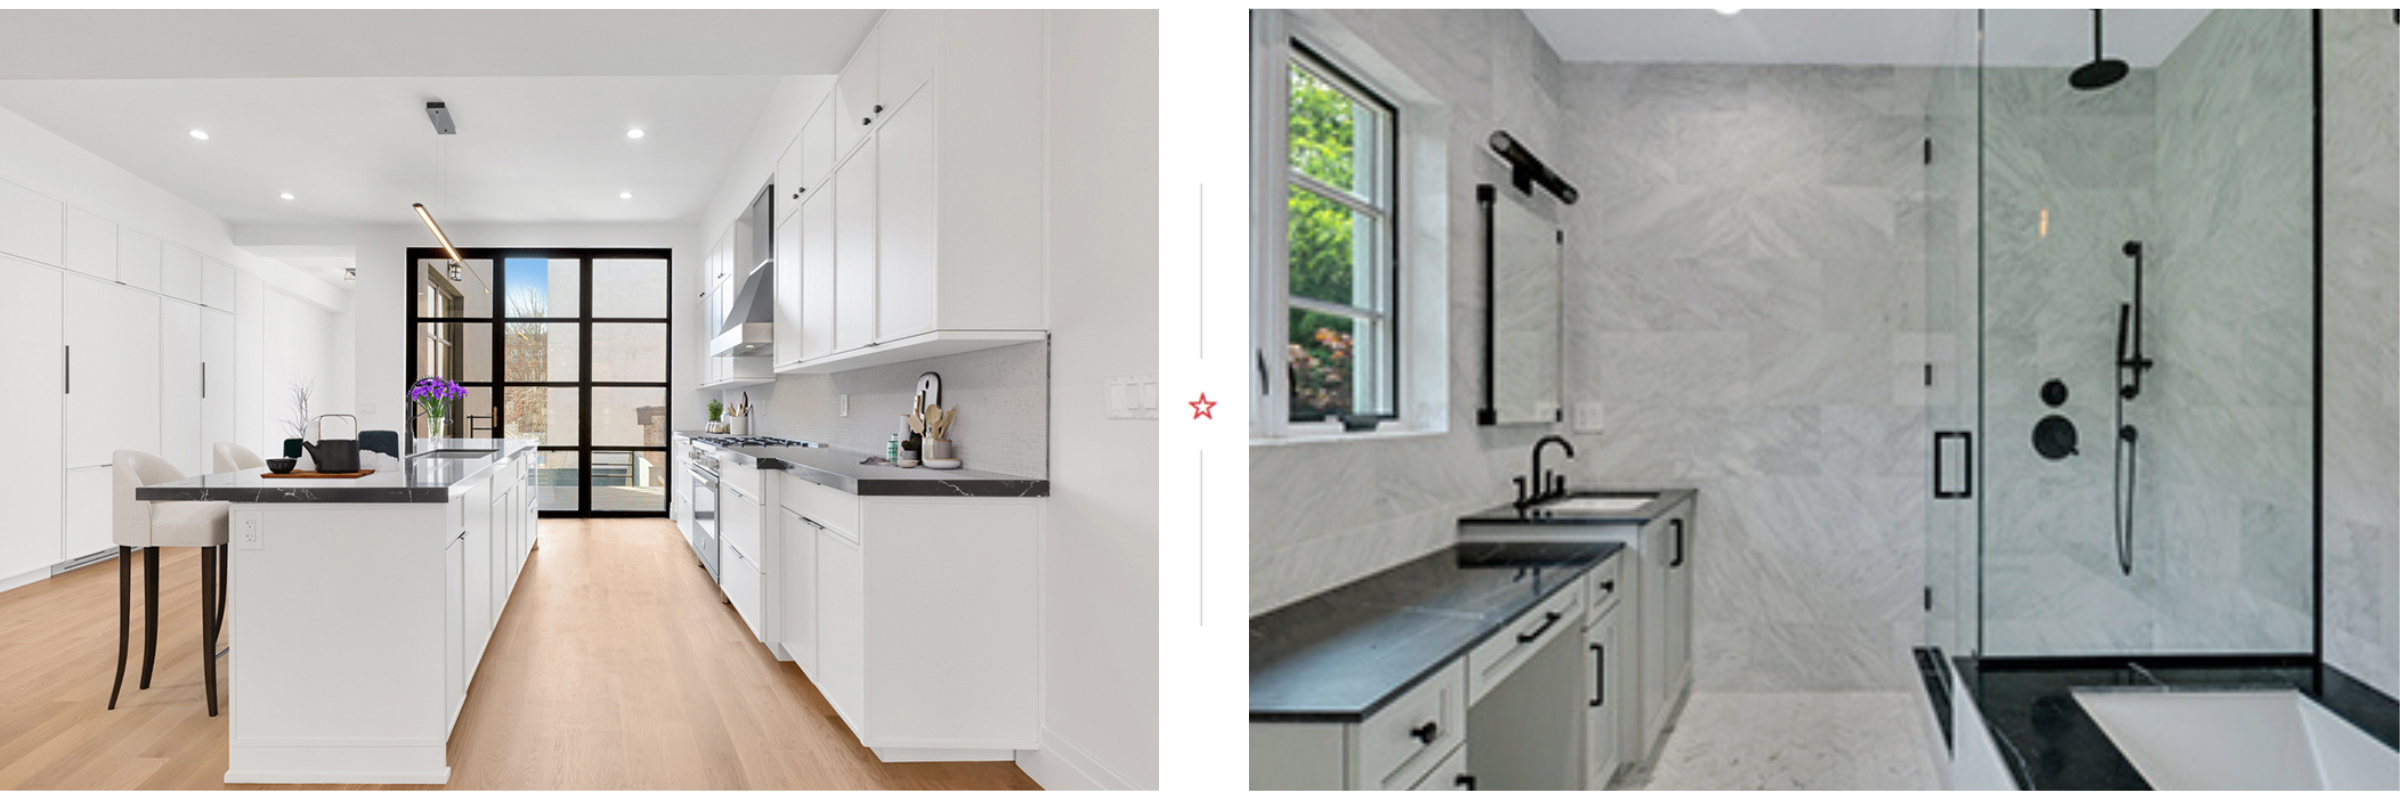 A kitchen remodel with wood floors and island on the left and a bathroom remodel with built-in bath and standing shower on the right.